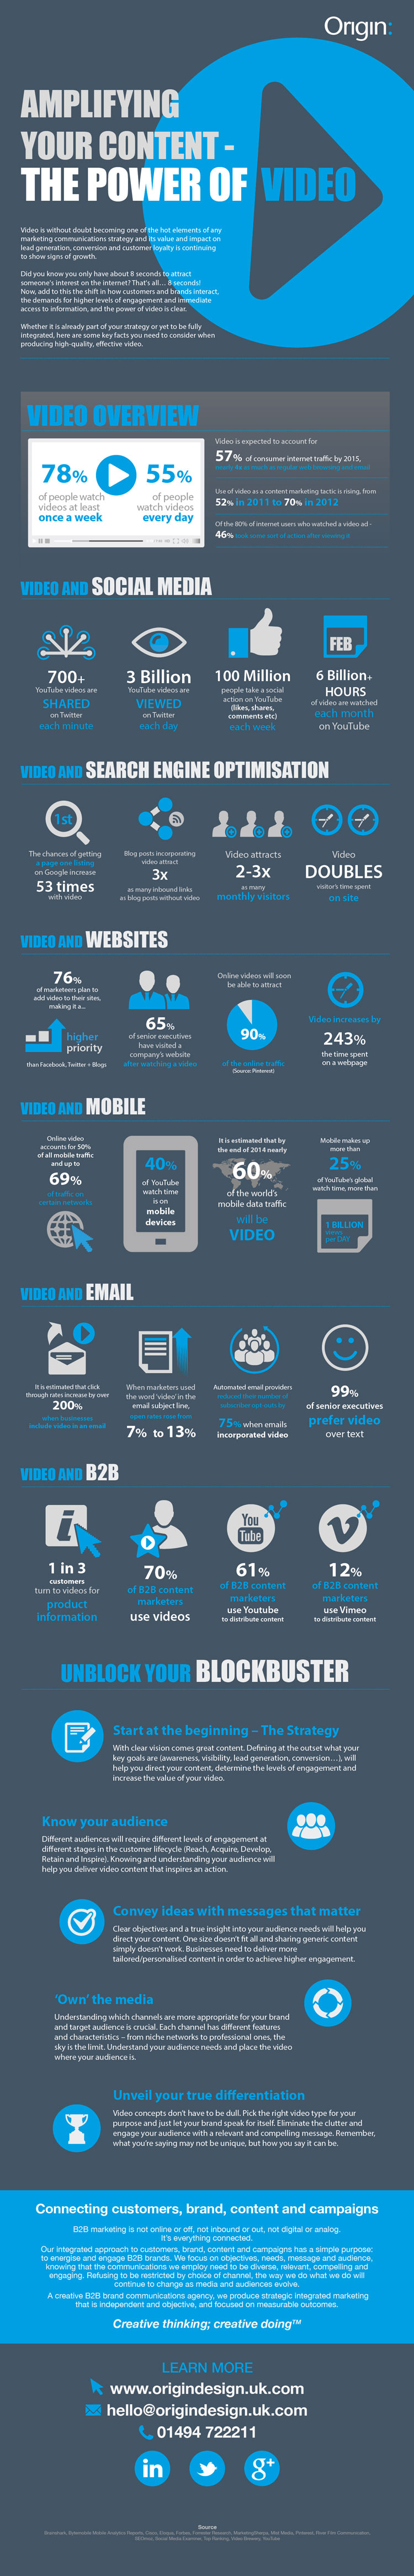 video production services infographic